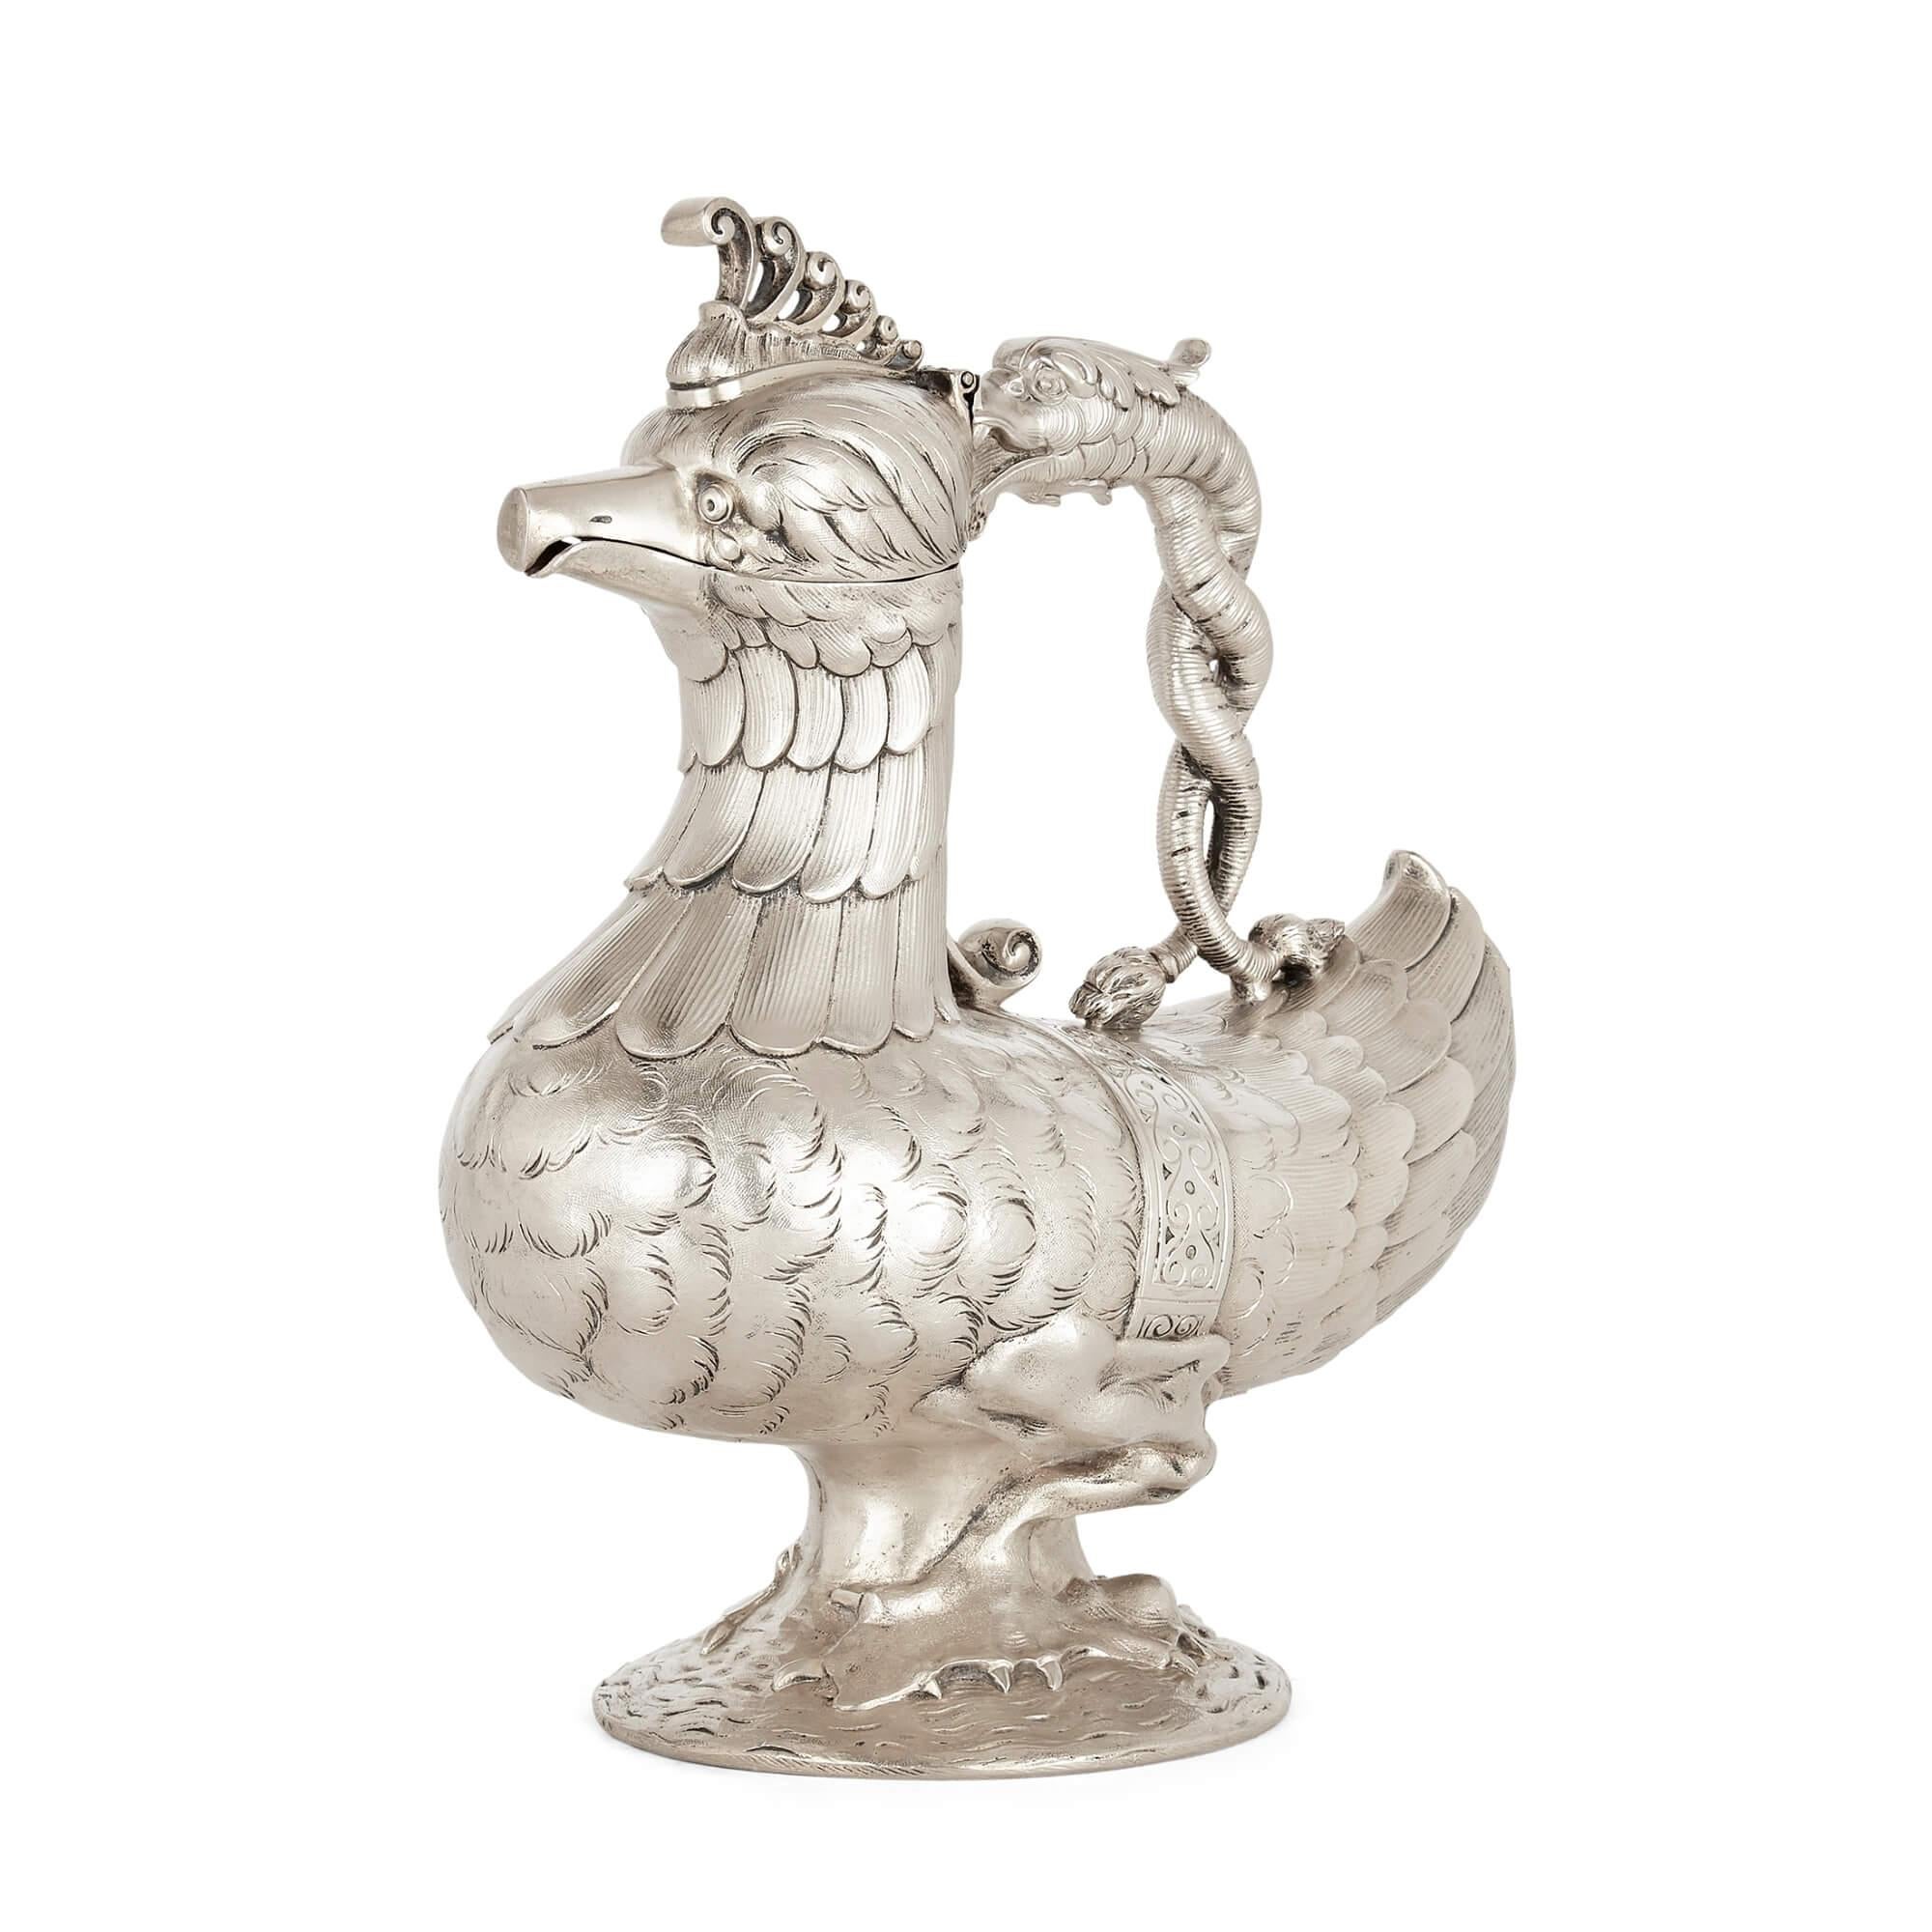 Indian silver mythological bird-form jug
Indian, 19th Century
Height 27cm, width 22cm, depth 12cm

This unusual jug is crafted from silver in the form of a bird being bitten by a dragon. The silver bird, complete with tooled and moulded plumage,